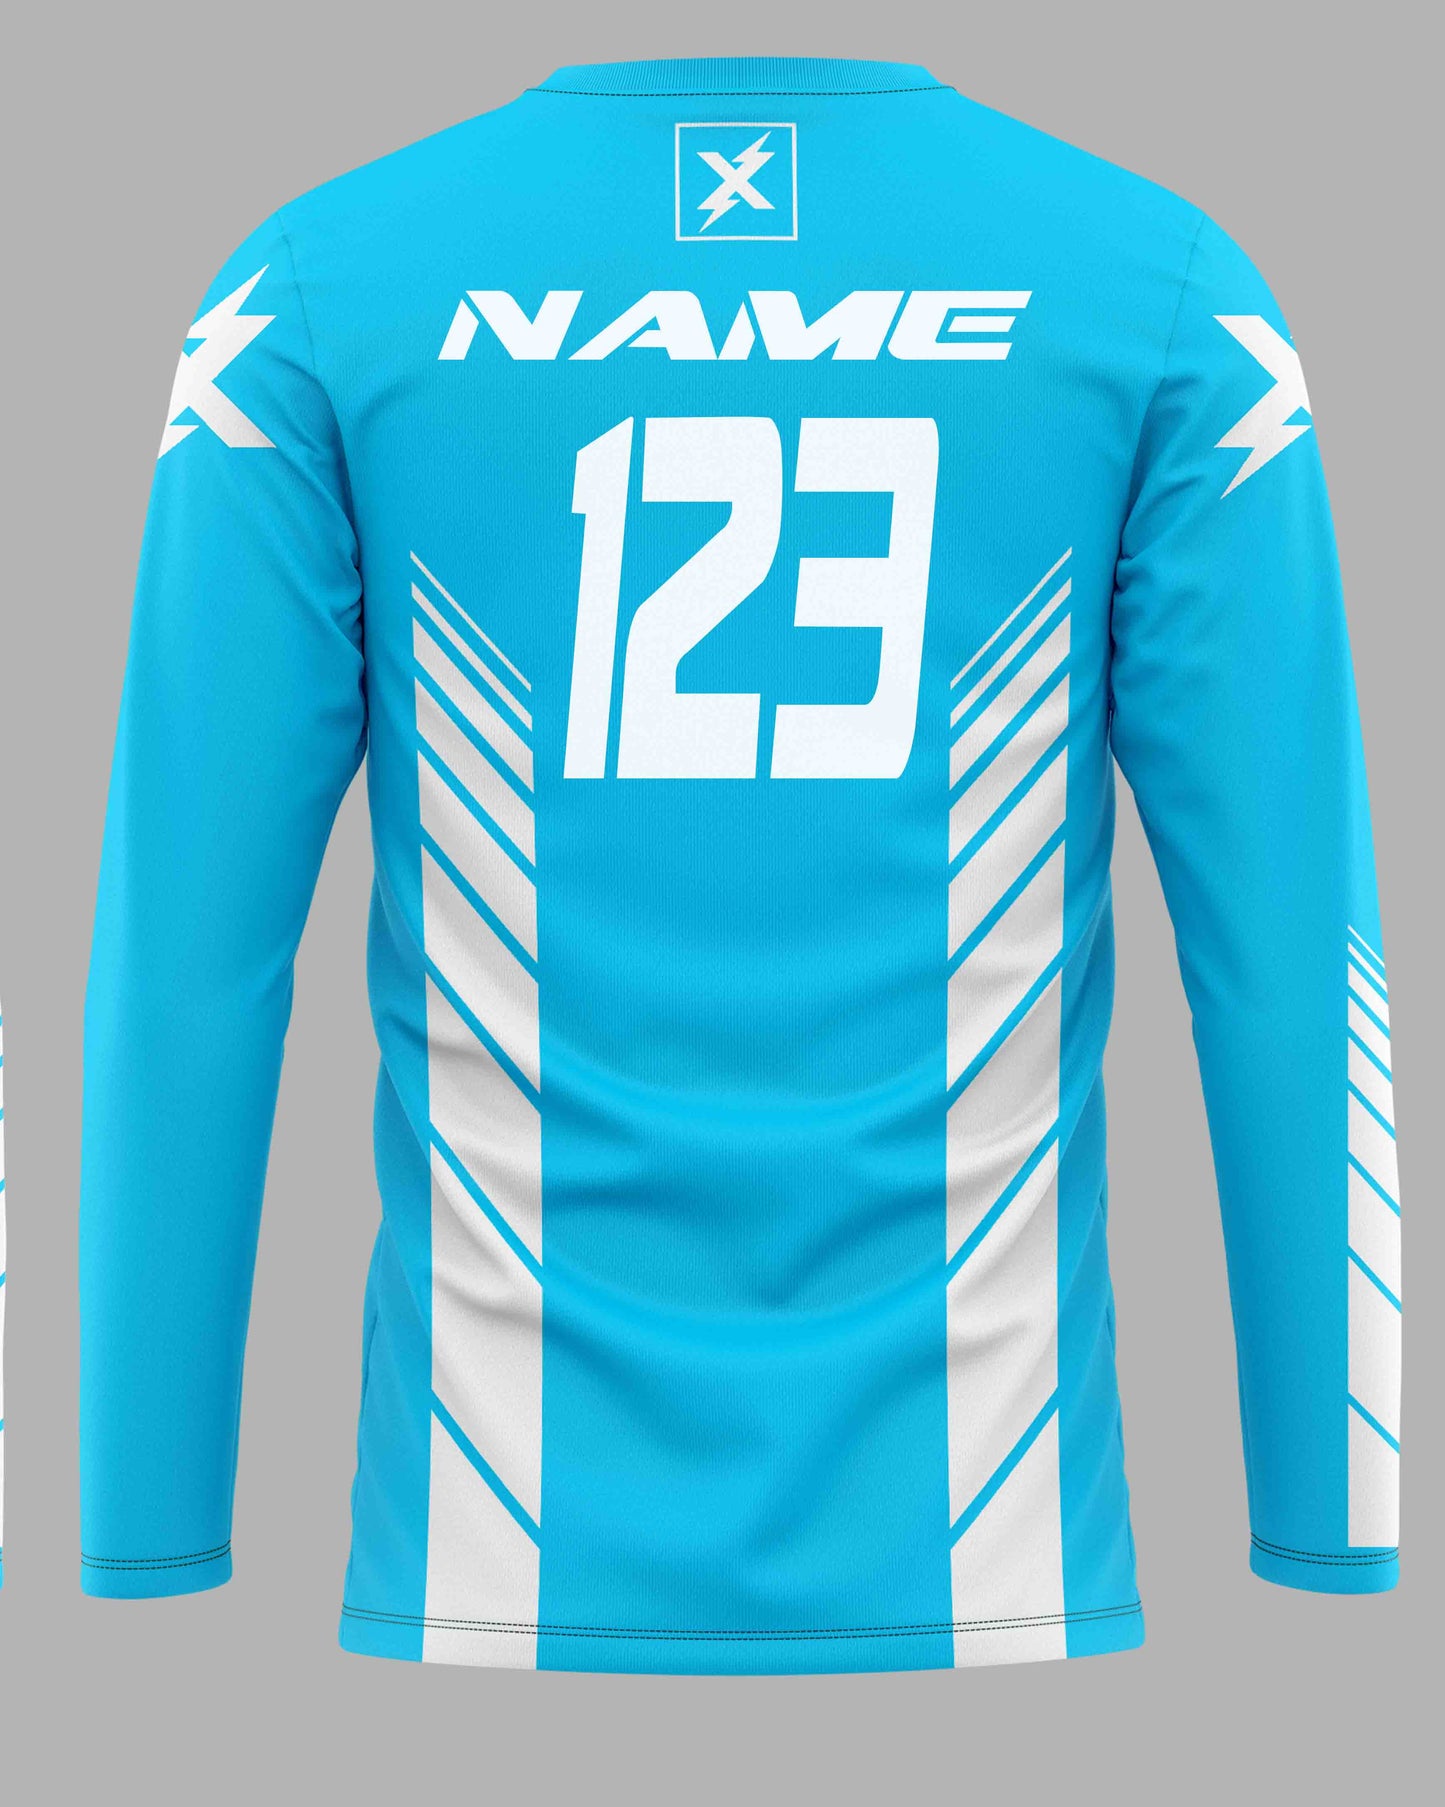 Jersey Speed Lines Cyan - FREE Custom Sublimation